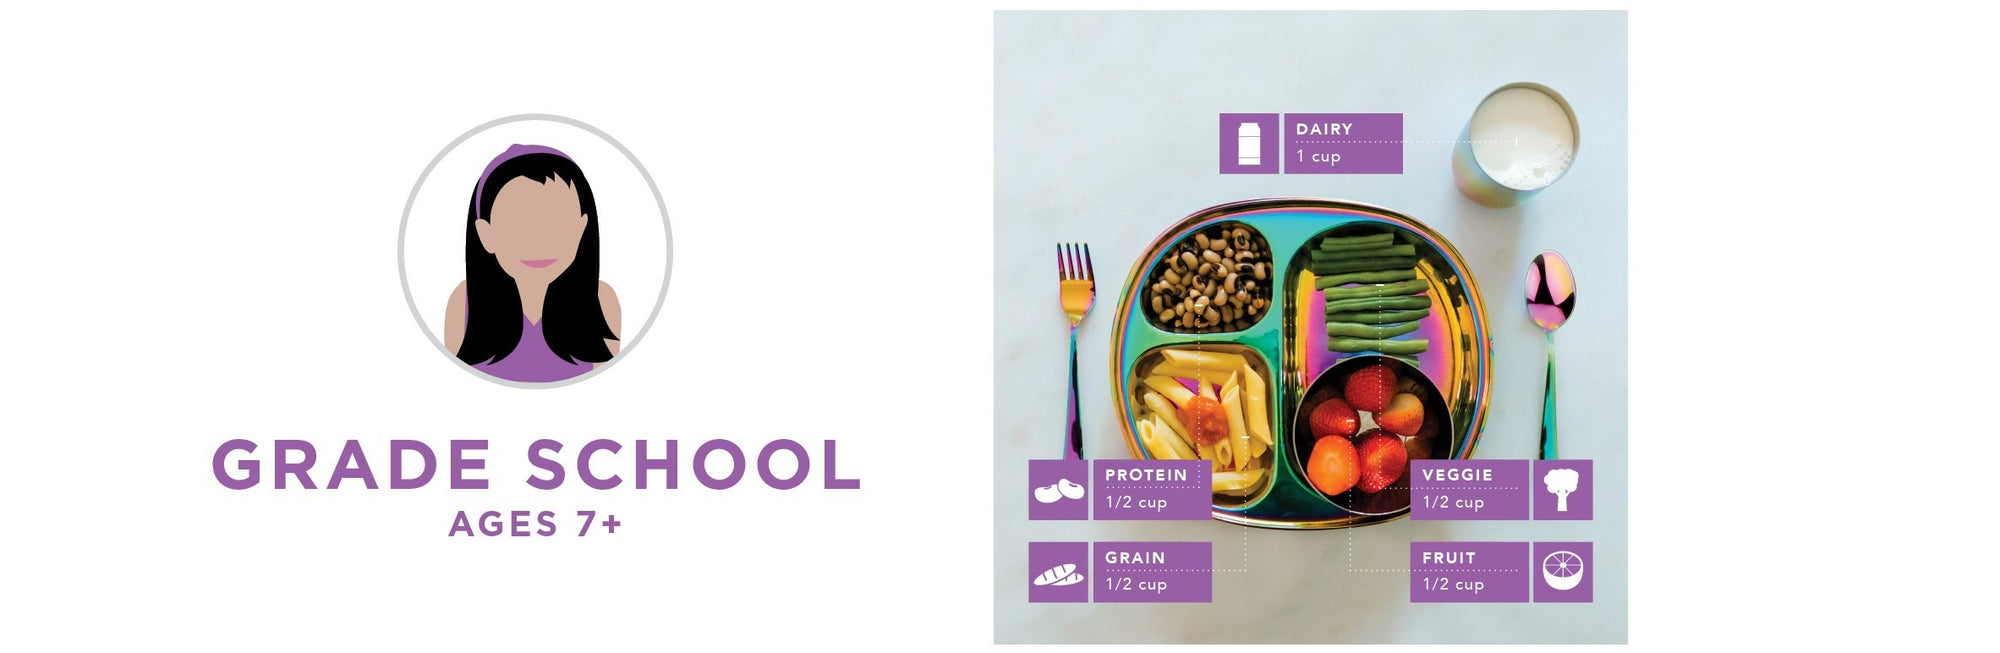 Grade School ages 7+ Mealtime Guides - Dairy 1 cup, Protein 1/2 cup, Grain 1/2 cup, Veggie 1/2 cup and Fruit 1/2 cup